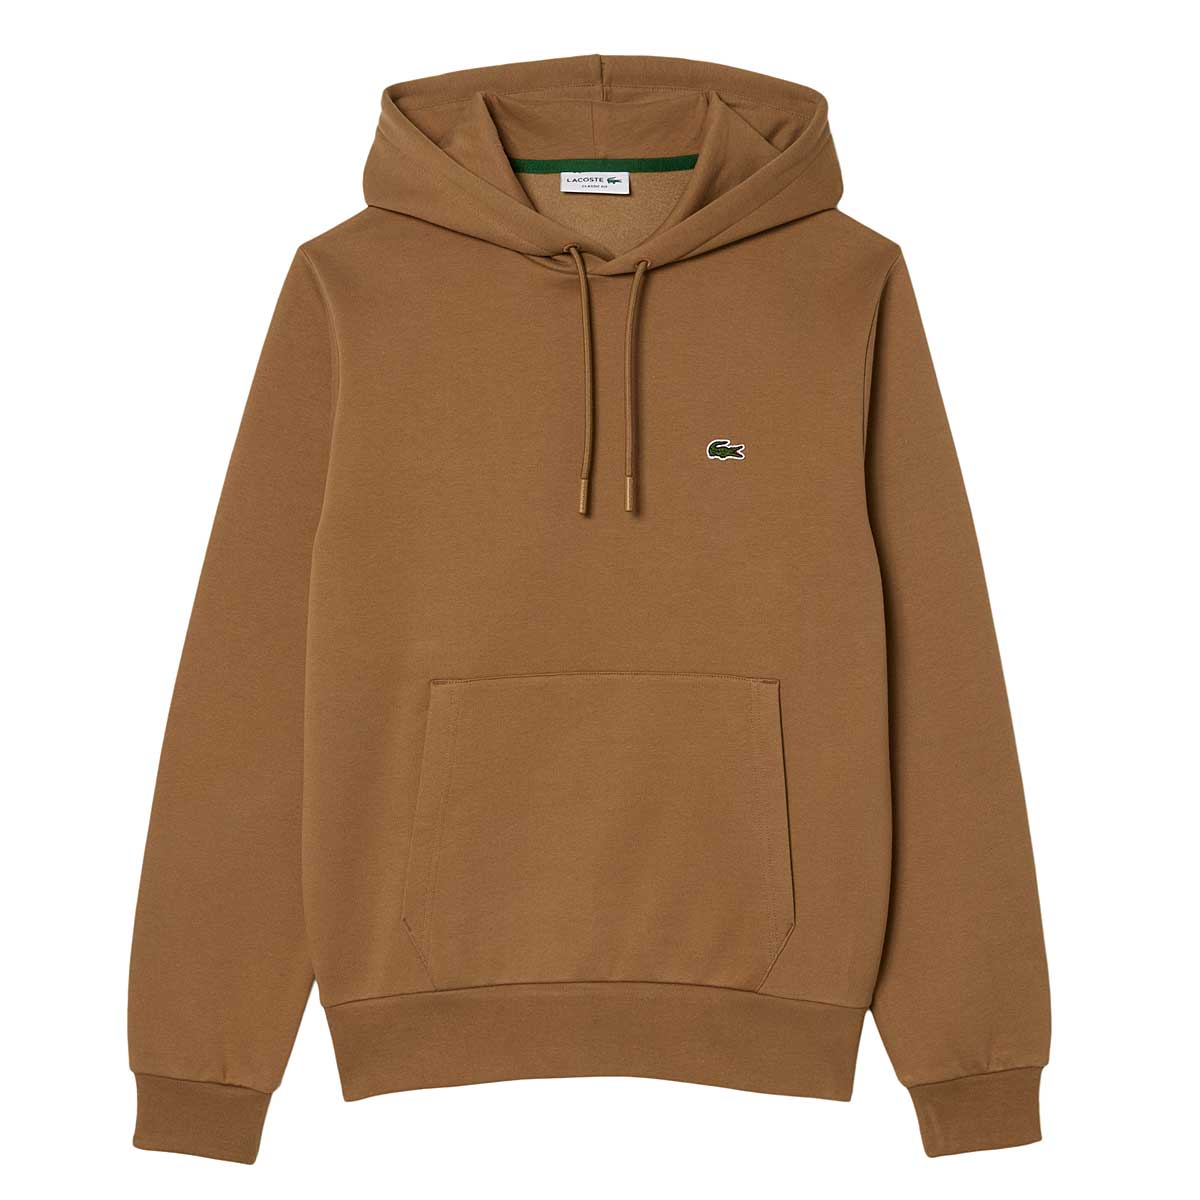 Image of Lacoste Classic Small Croc Hoody, Brown